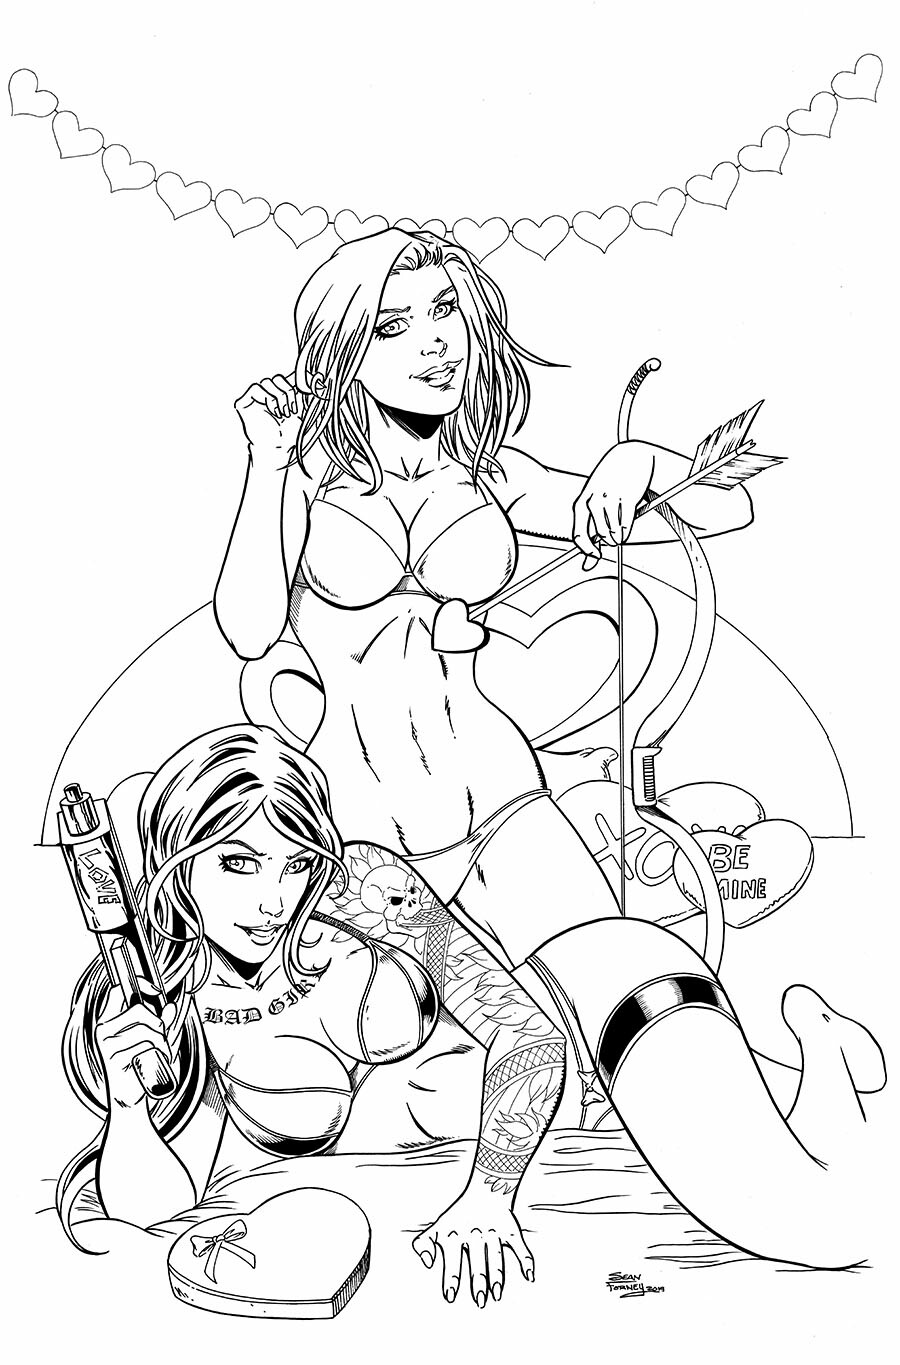 Notti and Nyce 2019 Valentine's Day special pinup. 

Pencils and inks by Sean Forney. 